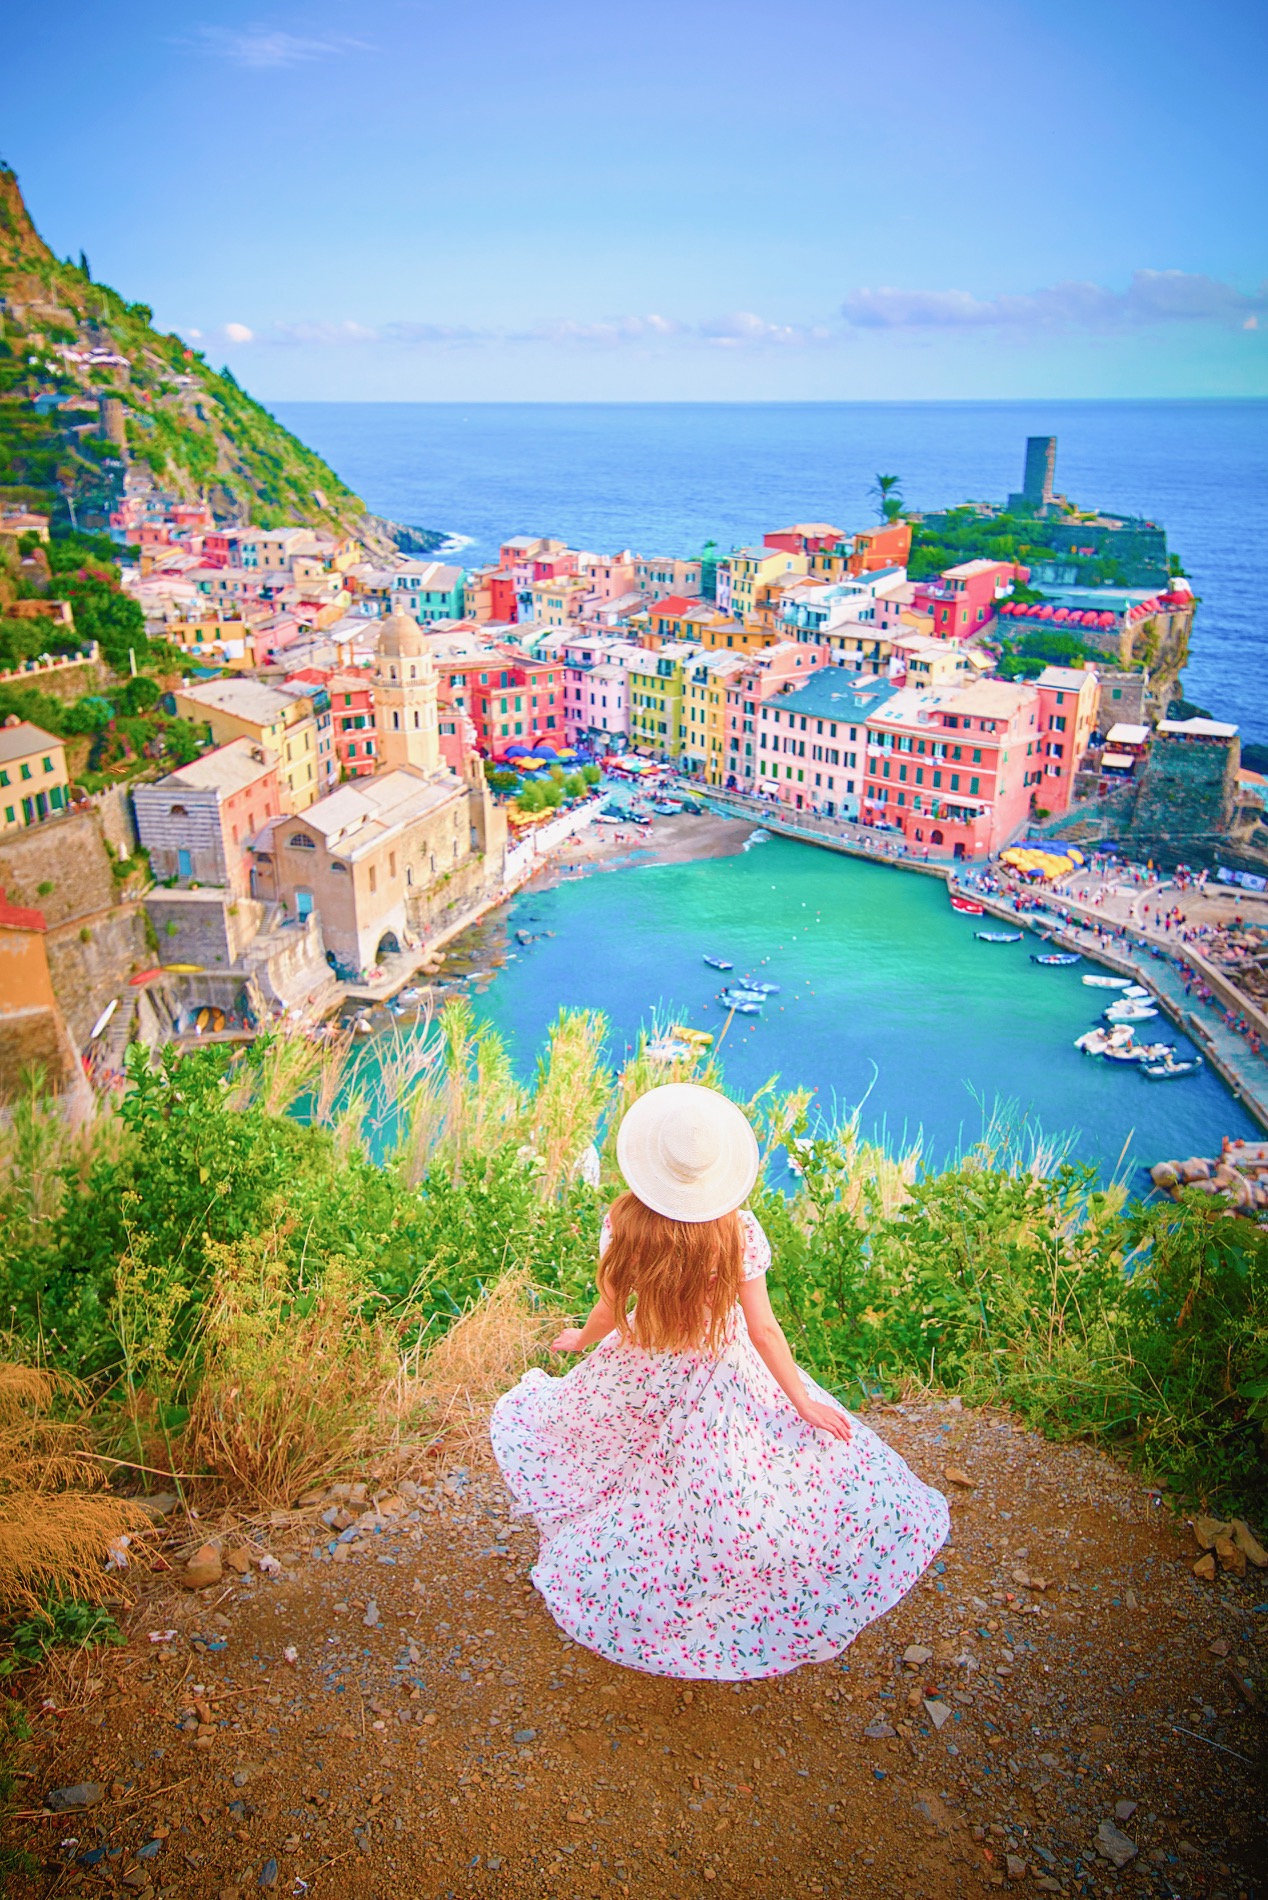 Woman in a floral dress and sun hat overlooking the harbor and colorful town of Vernazza, Italy.